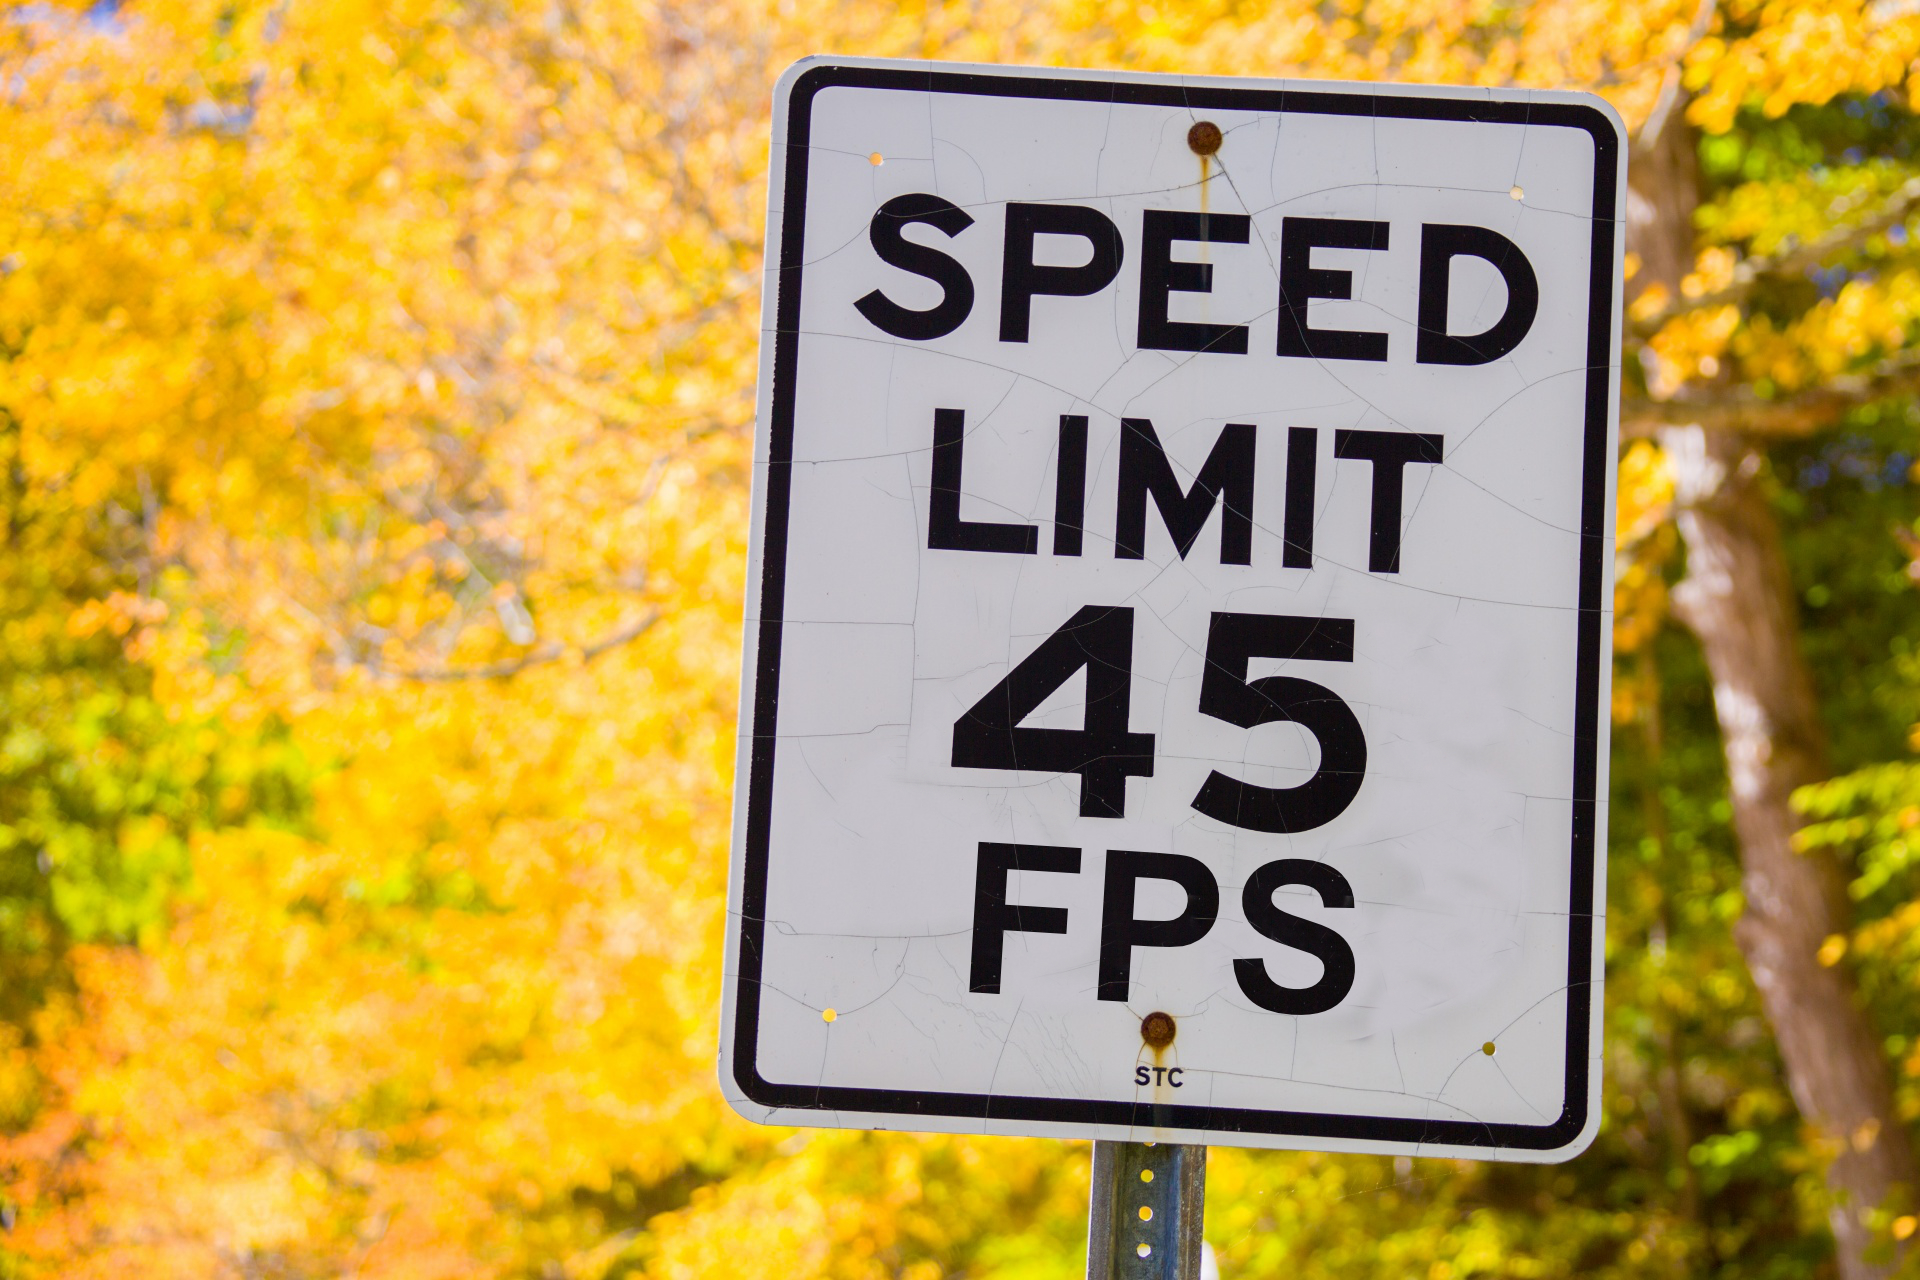 a speed limit sign that says '45 fps'